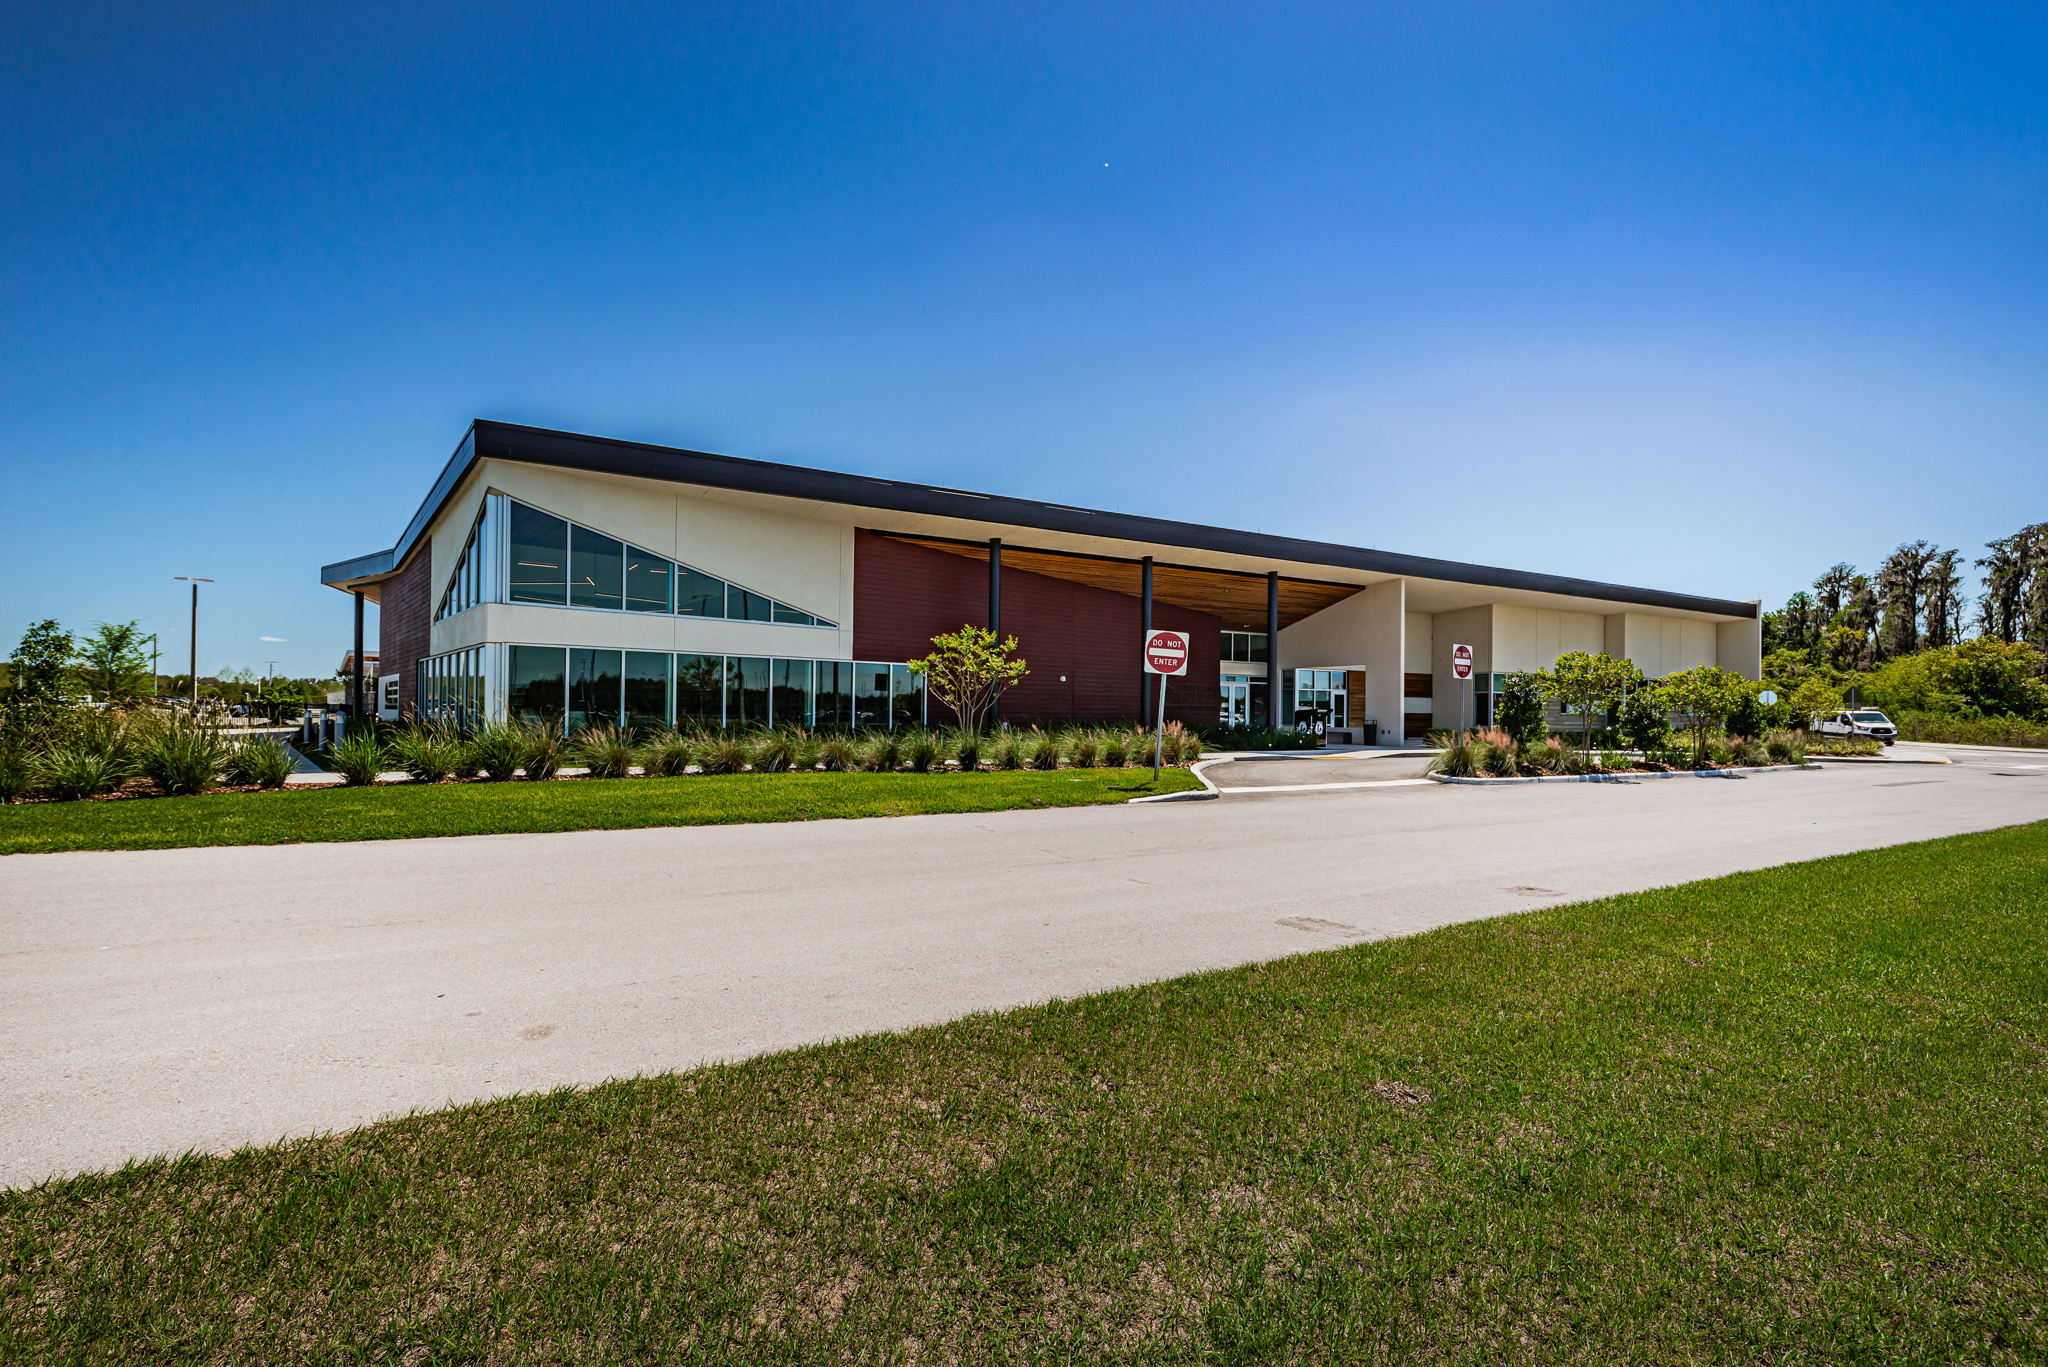 3-Starkey Ranch Theatre, Library and Cultural Center